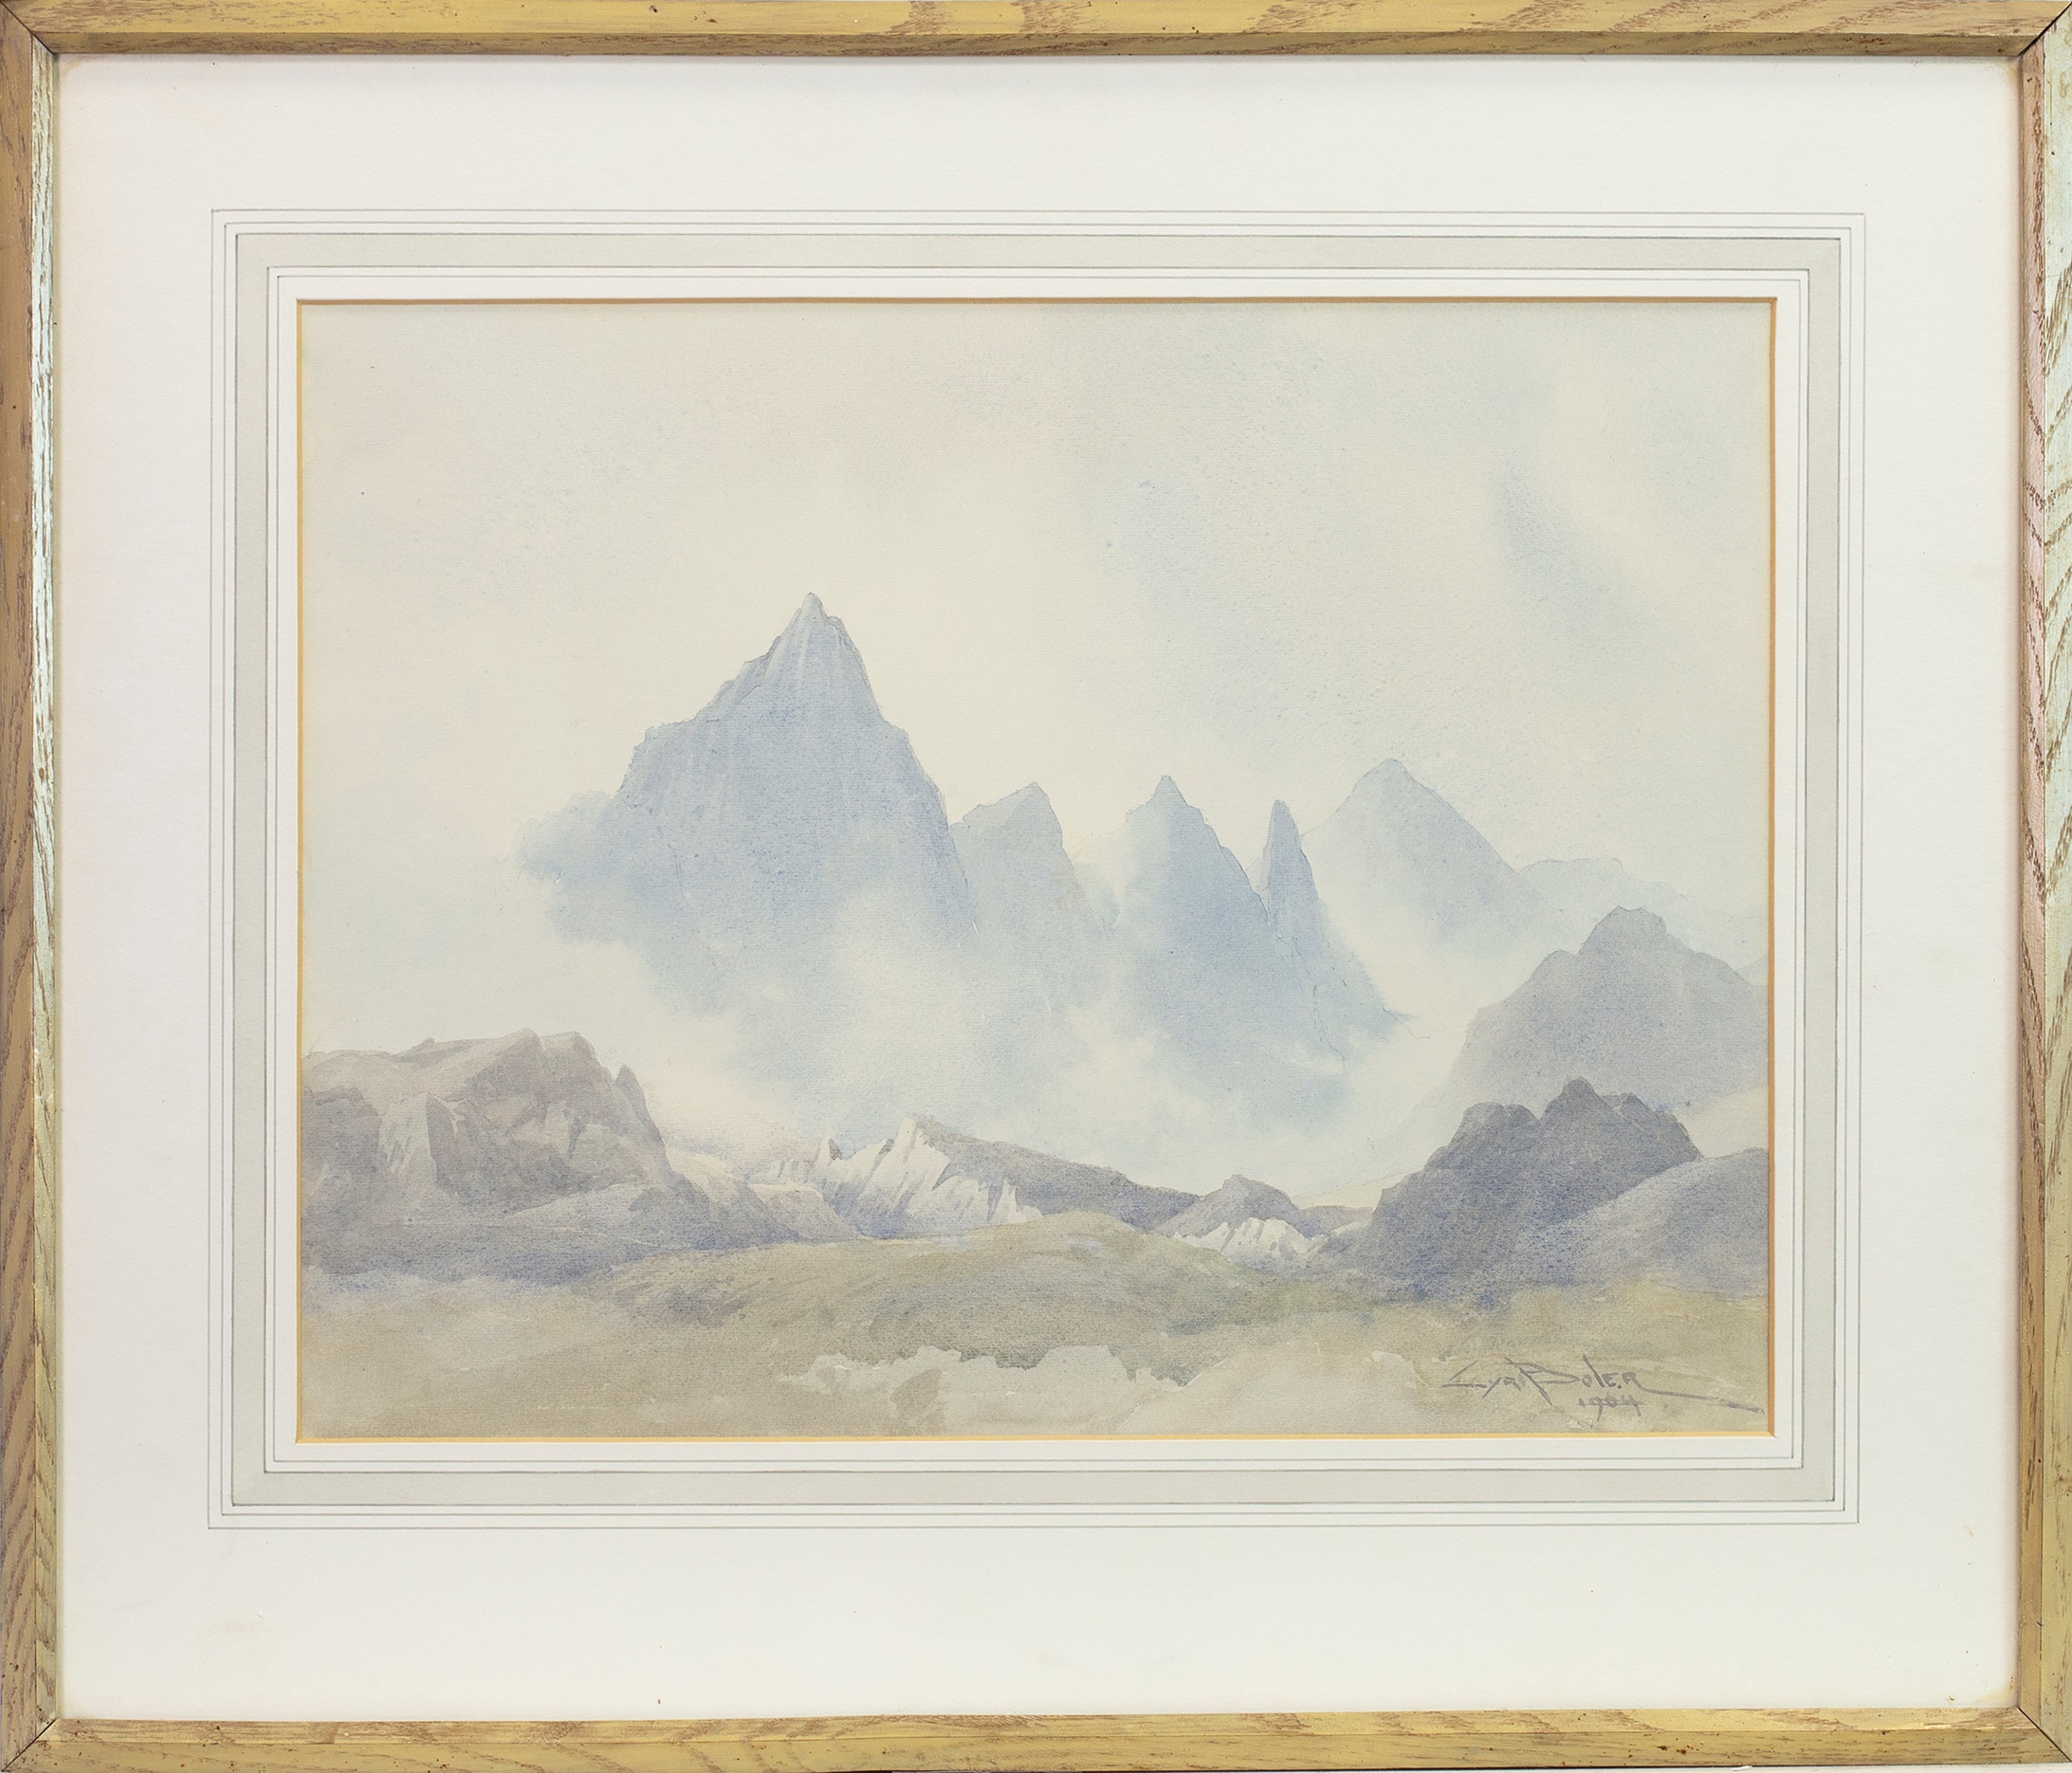 MISTY MOUNTAINS, A WATERCOLOUR BY CYRIL BOLER